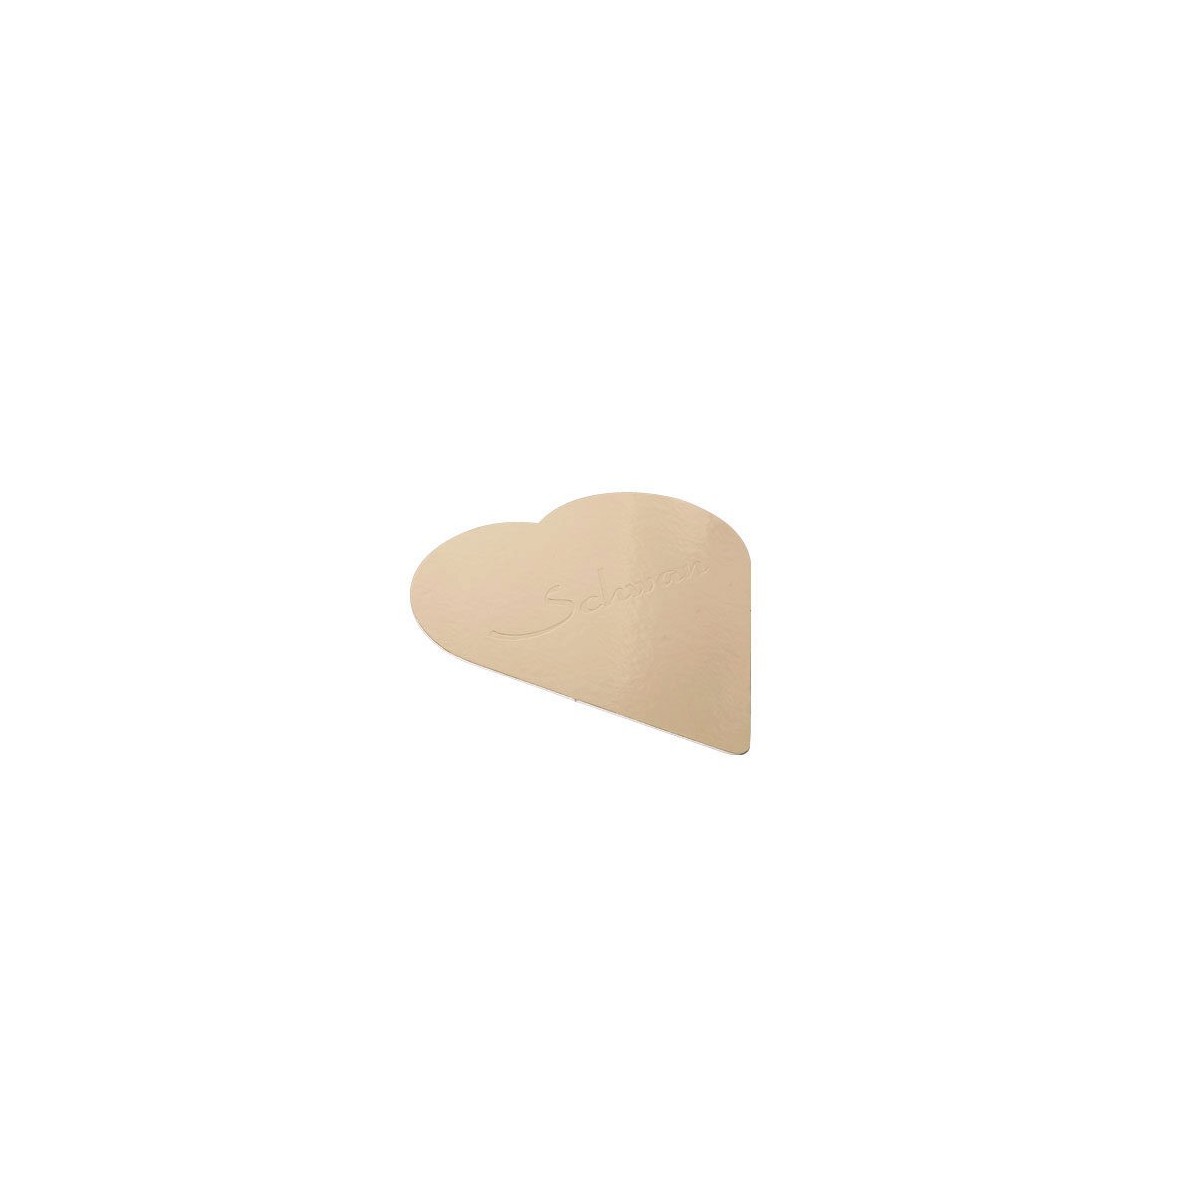 CAKE BOARD HEART GOLD 16 CM 25 PIECES FOSTPLUS INCLUDED  PACKAGE